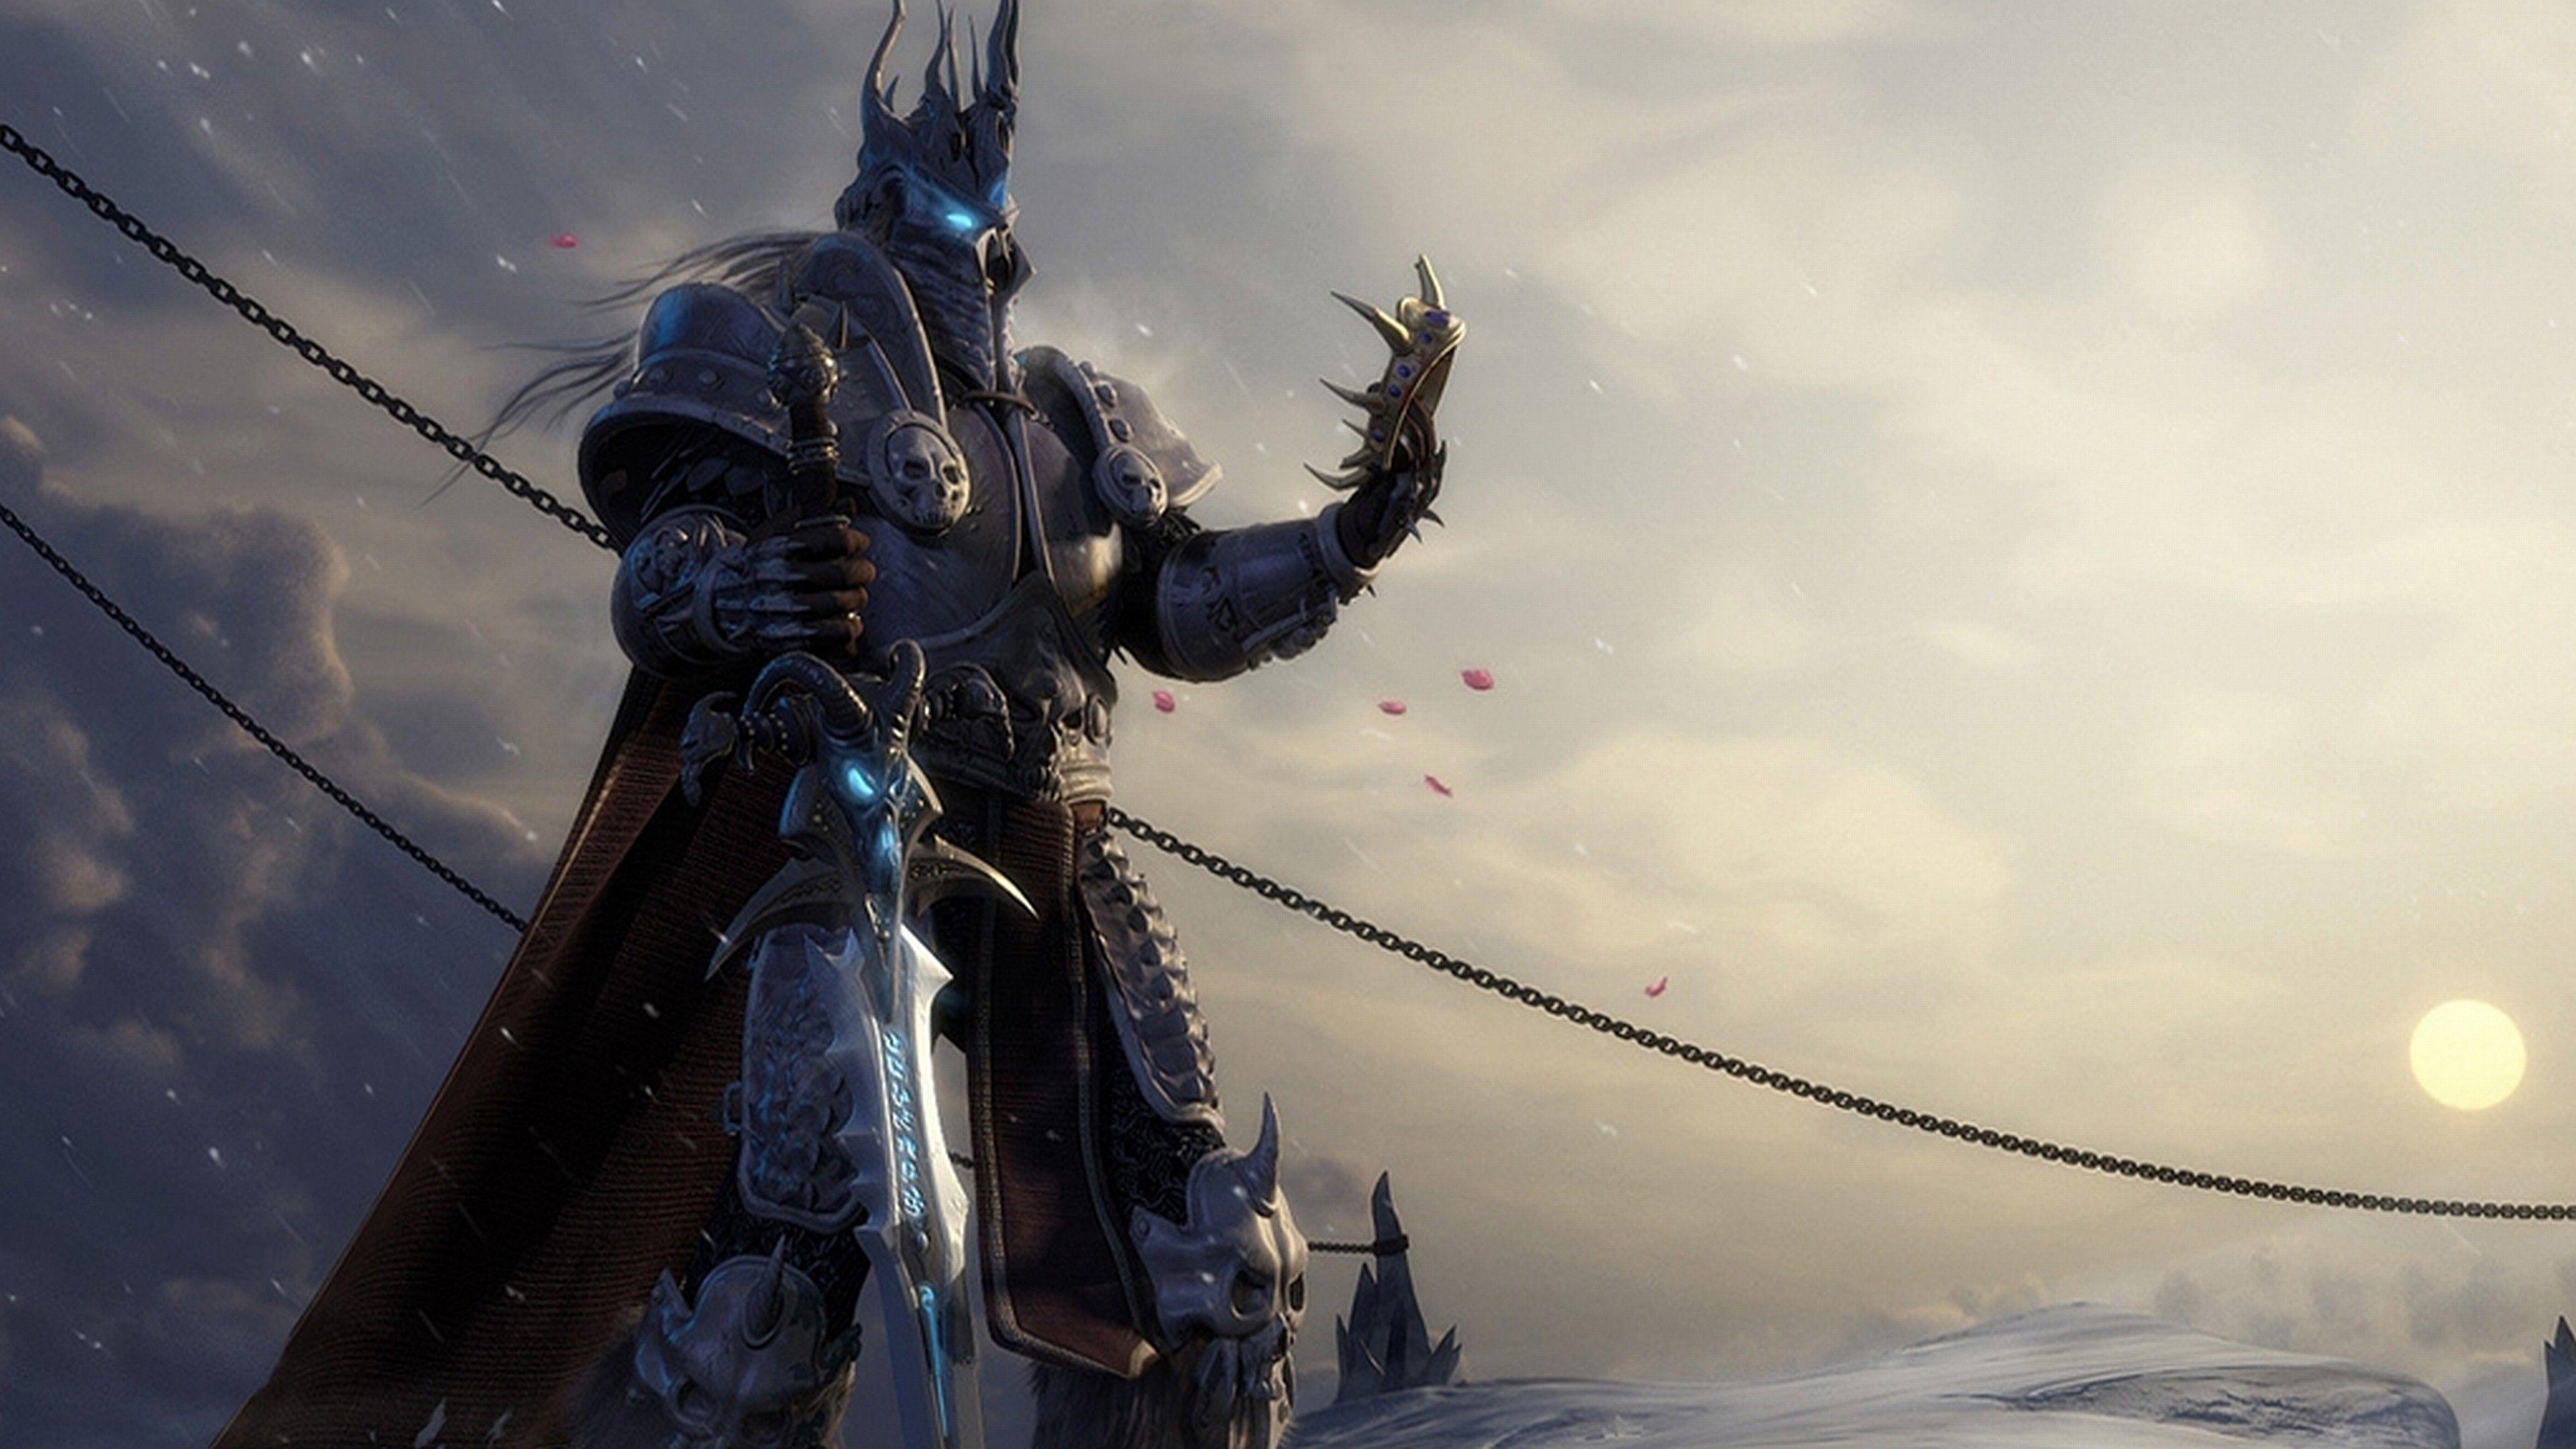 Lich king» 1080P, 2k, 4k HD wallpapers, backgrounds free download | Rare  Gallery